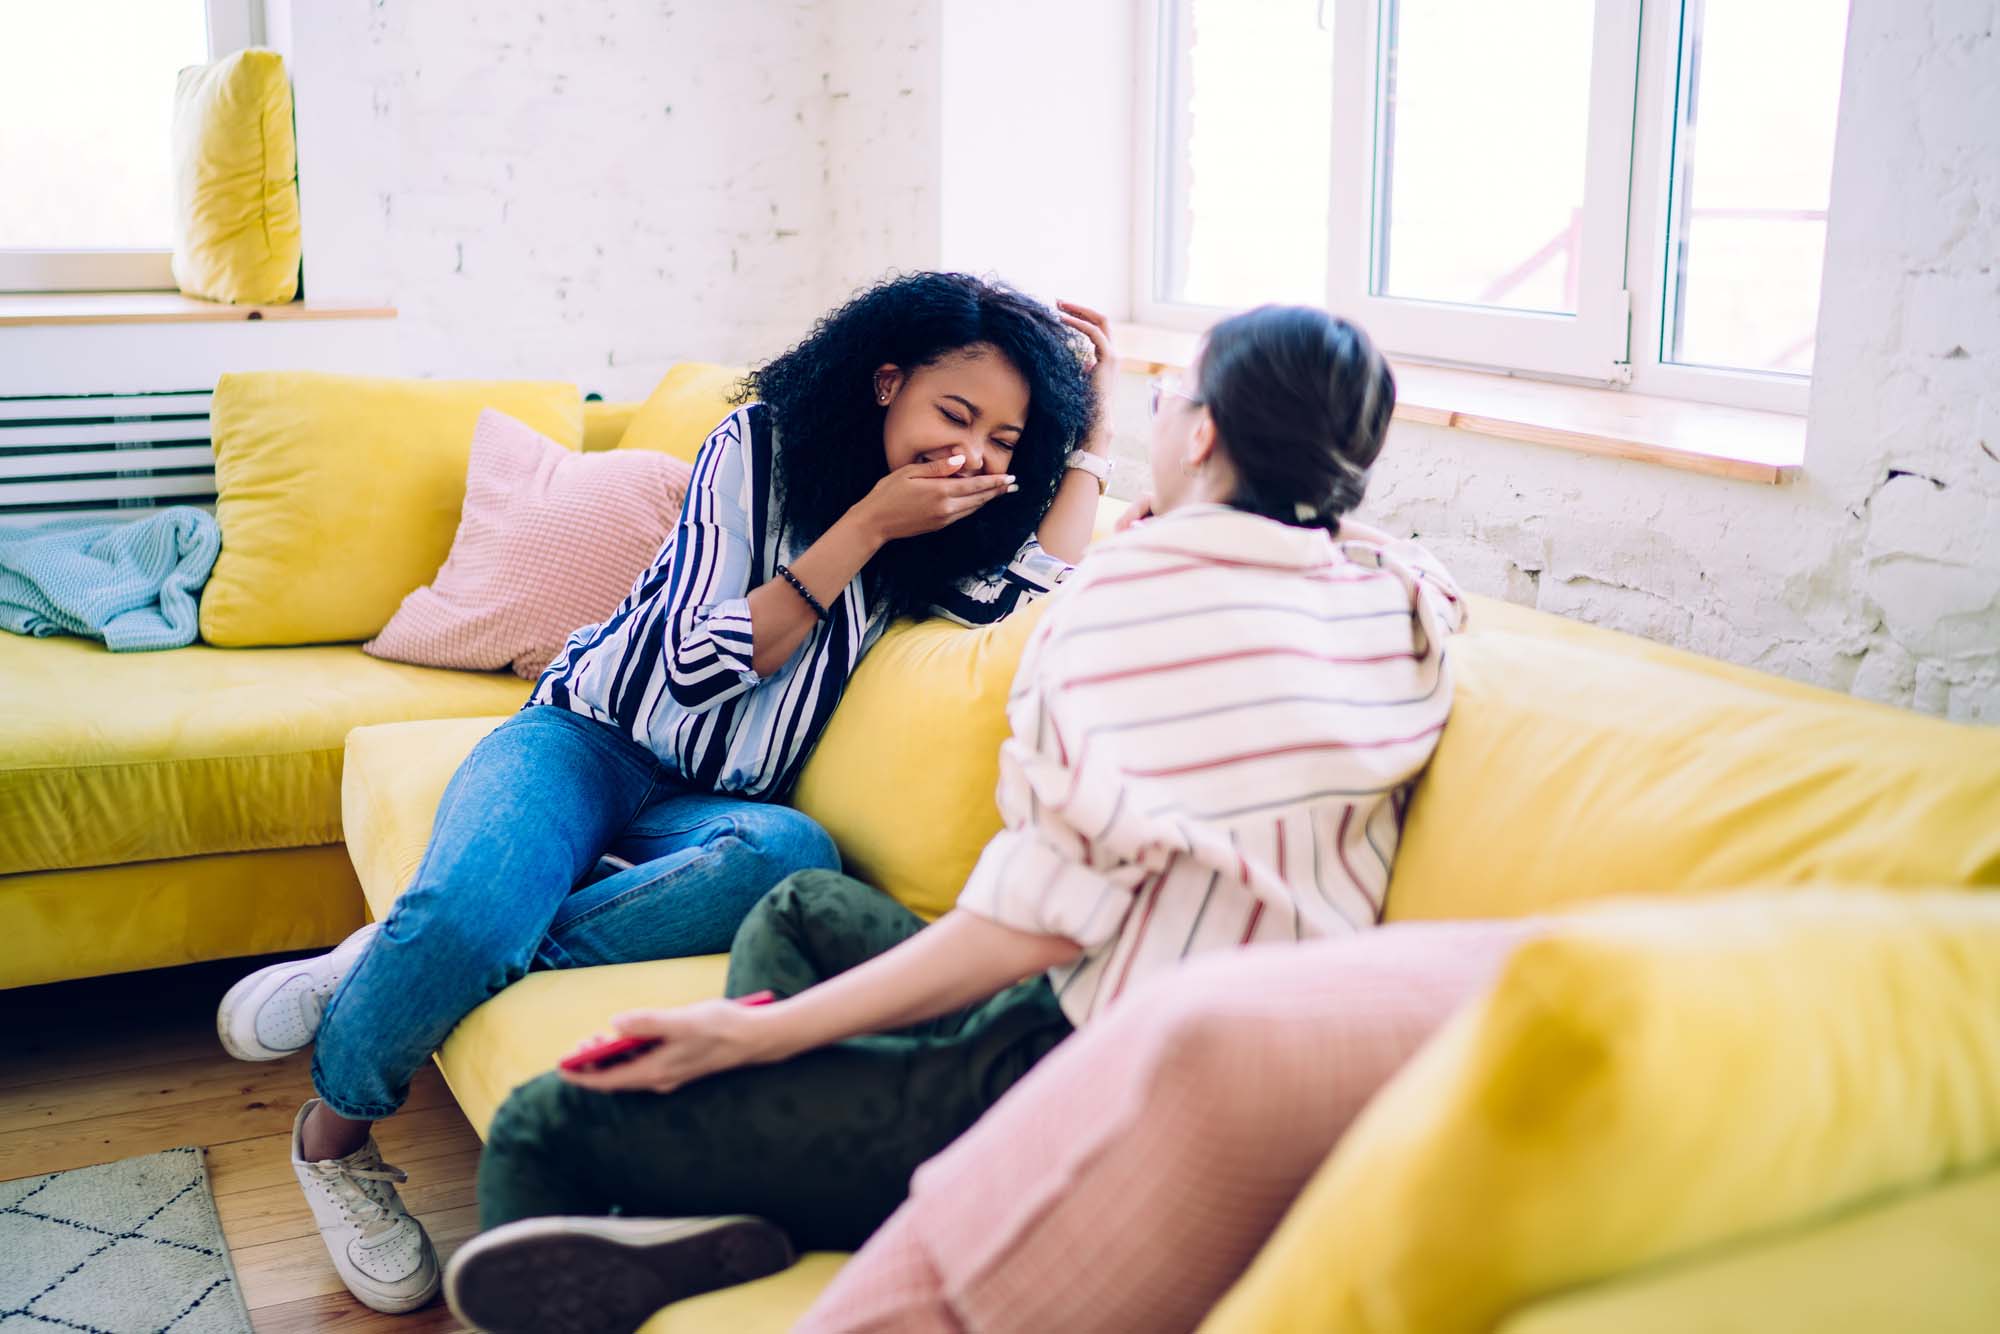 Roommate Communication: 10 Tips to Get Along With Your Roommate